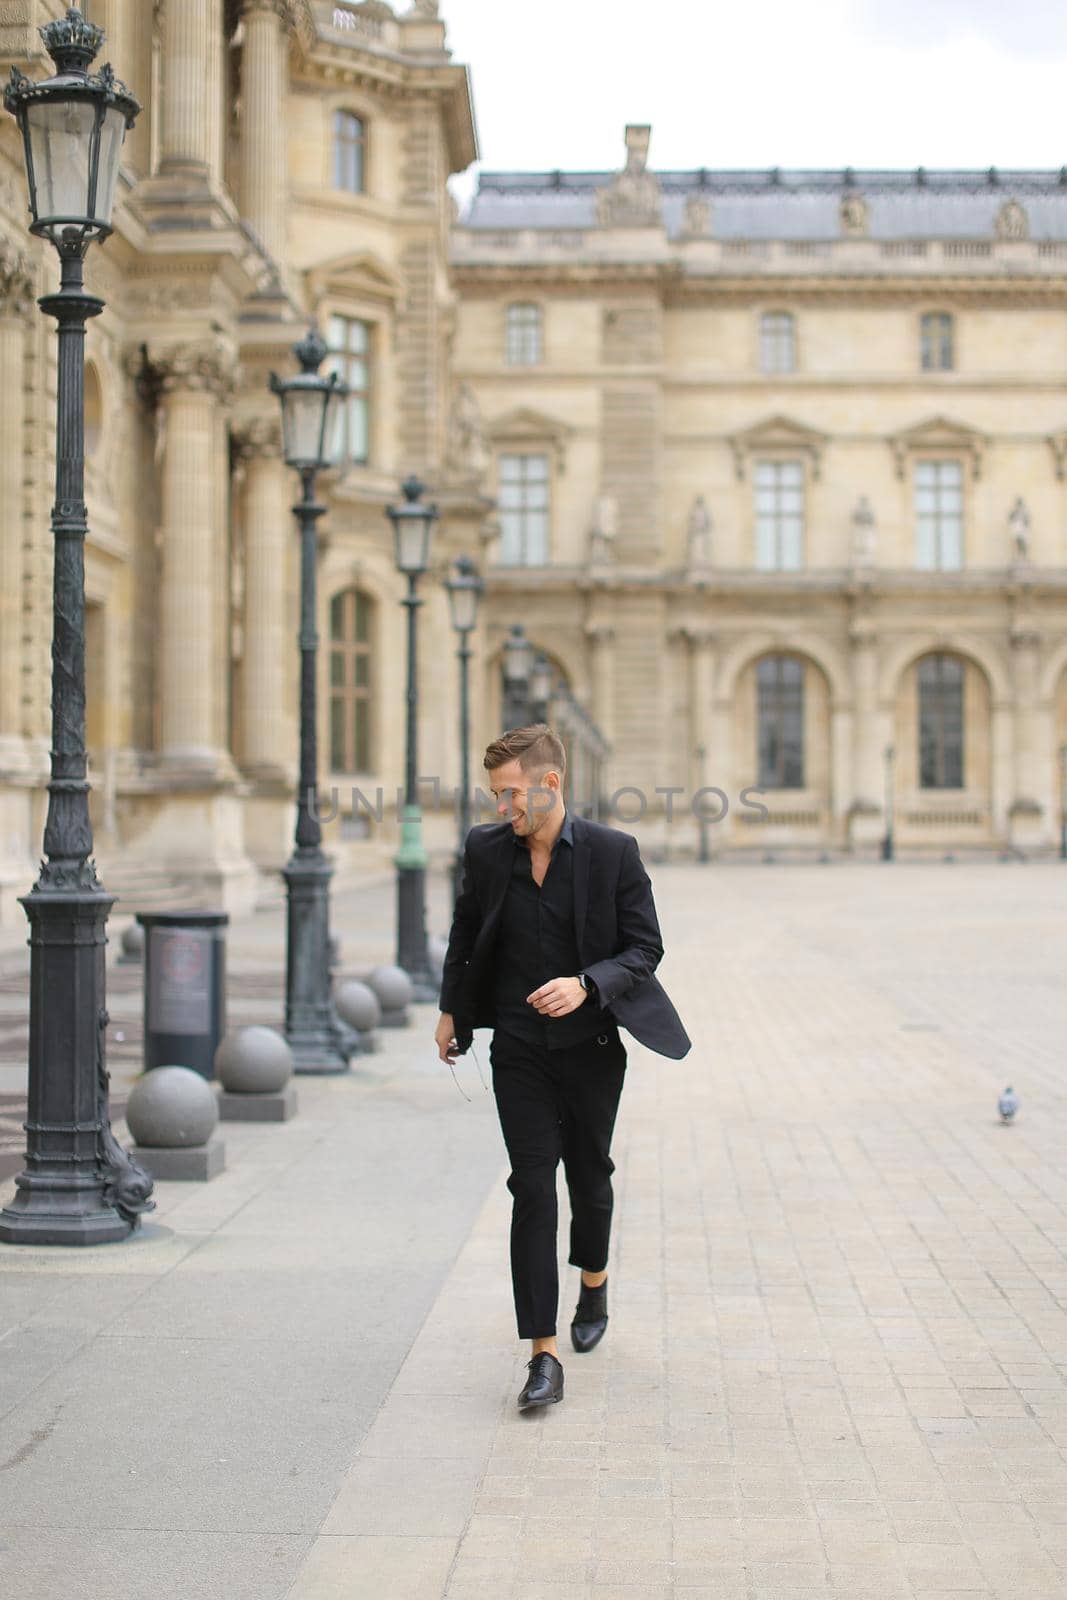 Young man strolling near building in Parisand wearing black suit, lanterns in background. Concept of male fashion model and urban photo session in France.